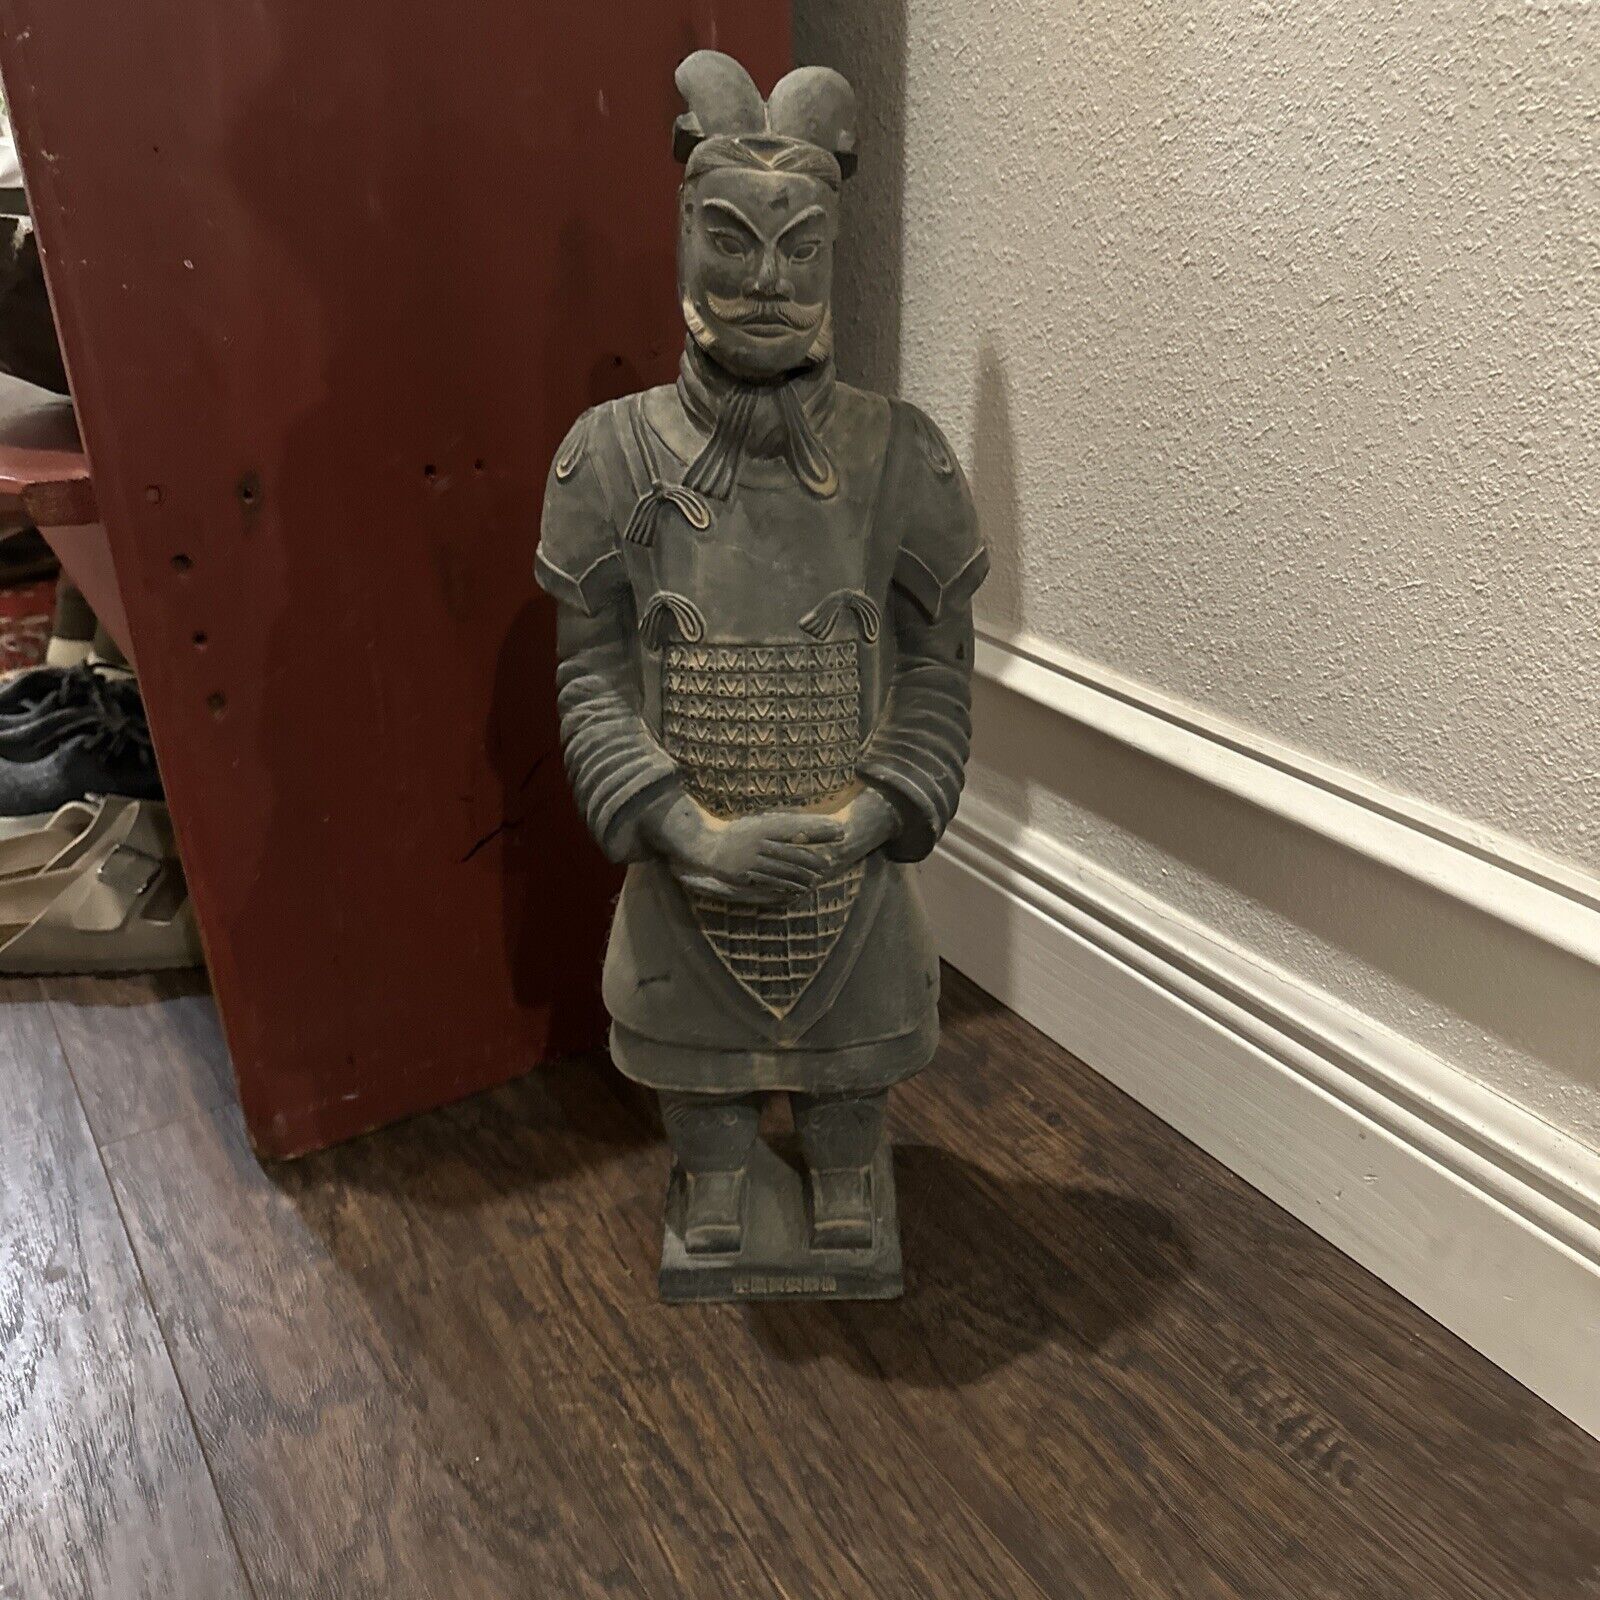 Vintage Large Chinese Warrior Soldier Terracotta Army Statue 23” Figurine